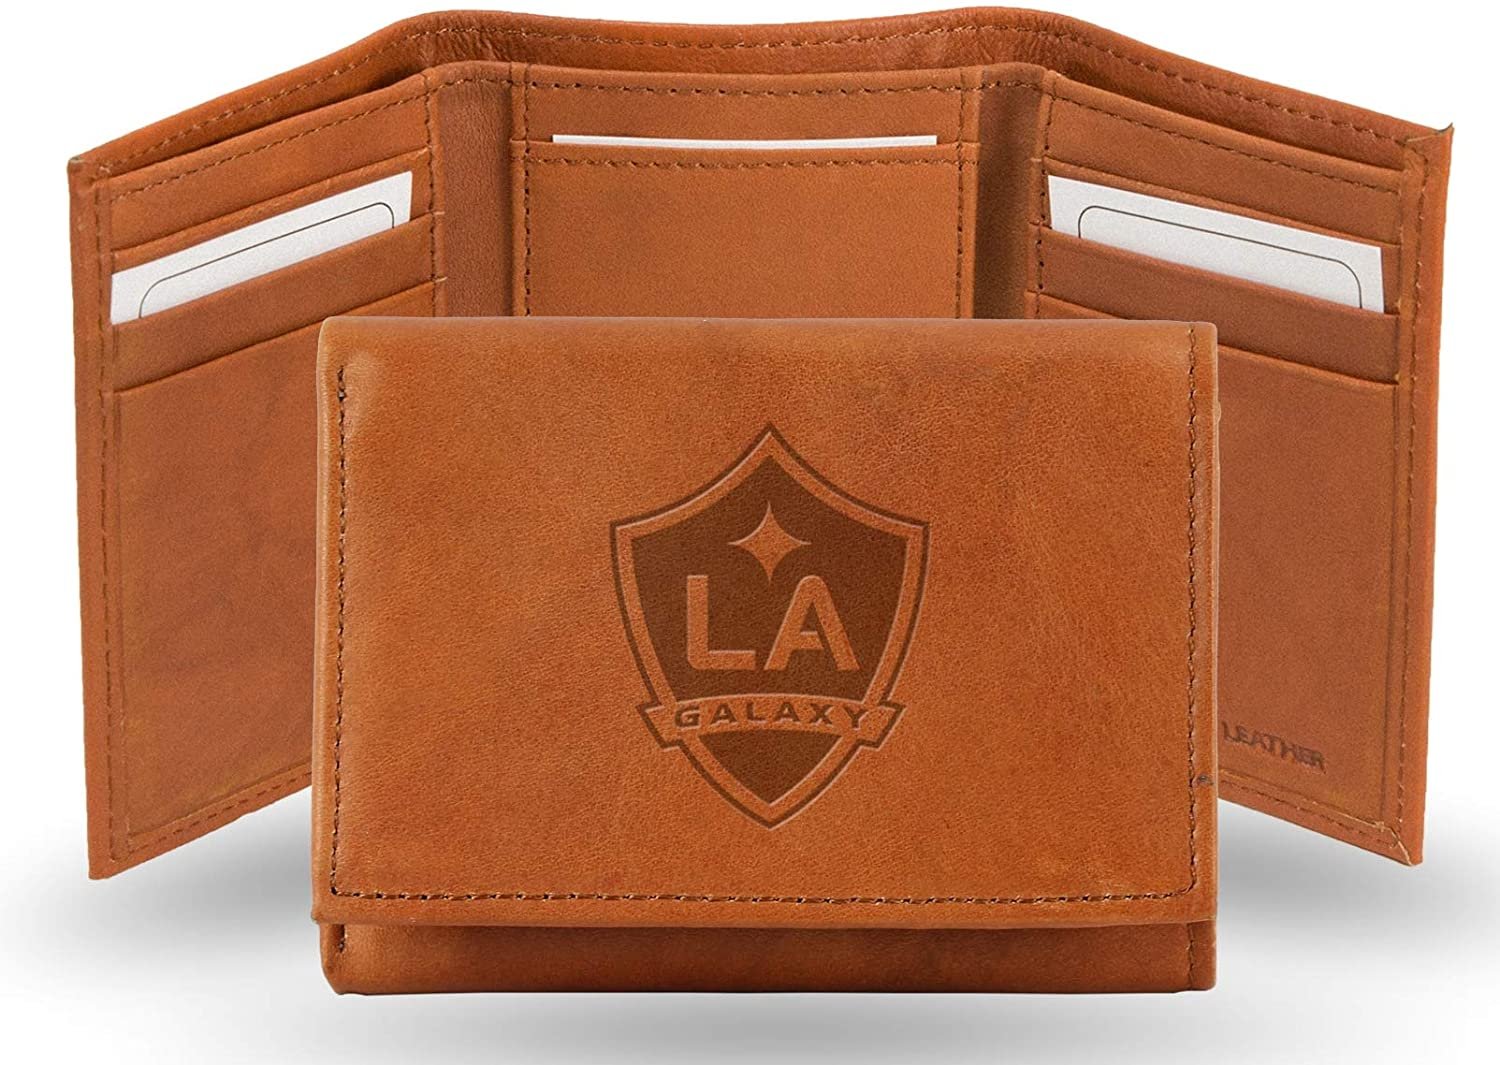 Los Angeles LA Galaxy Premium Brown Leather Wallet, Trifold, Embossed Laser Engraved